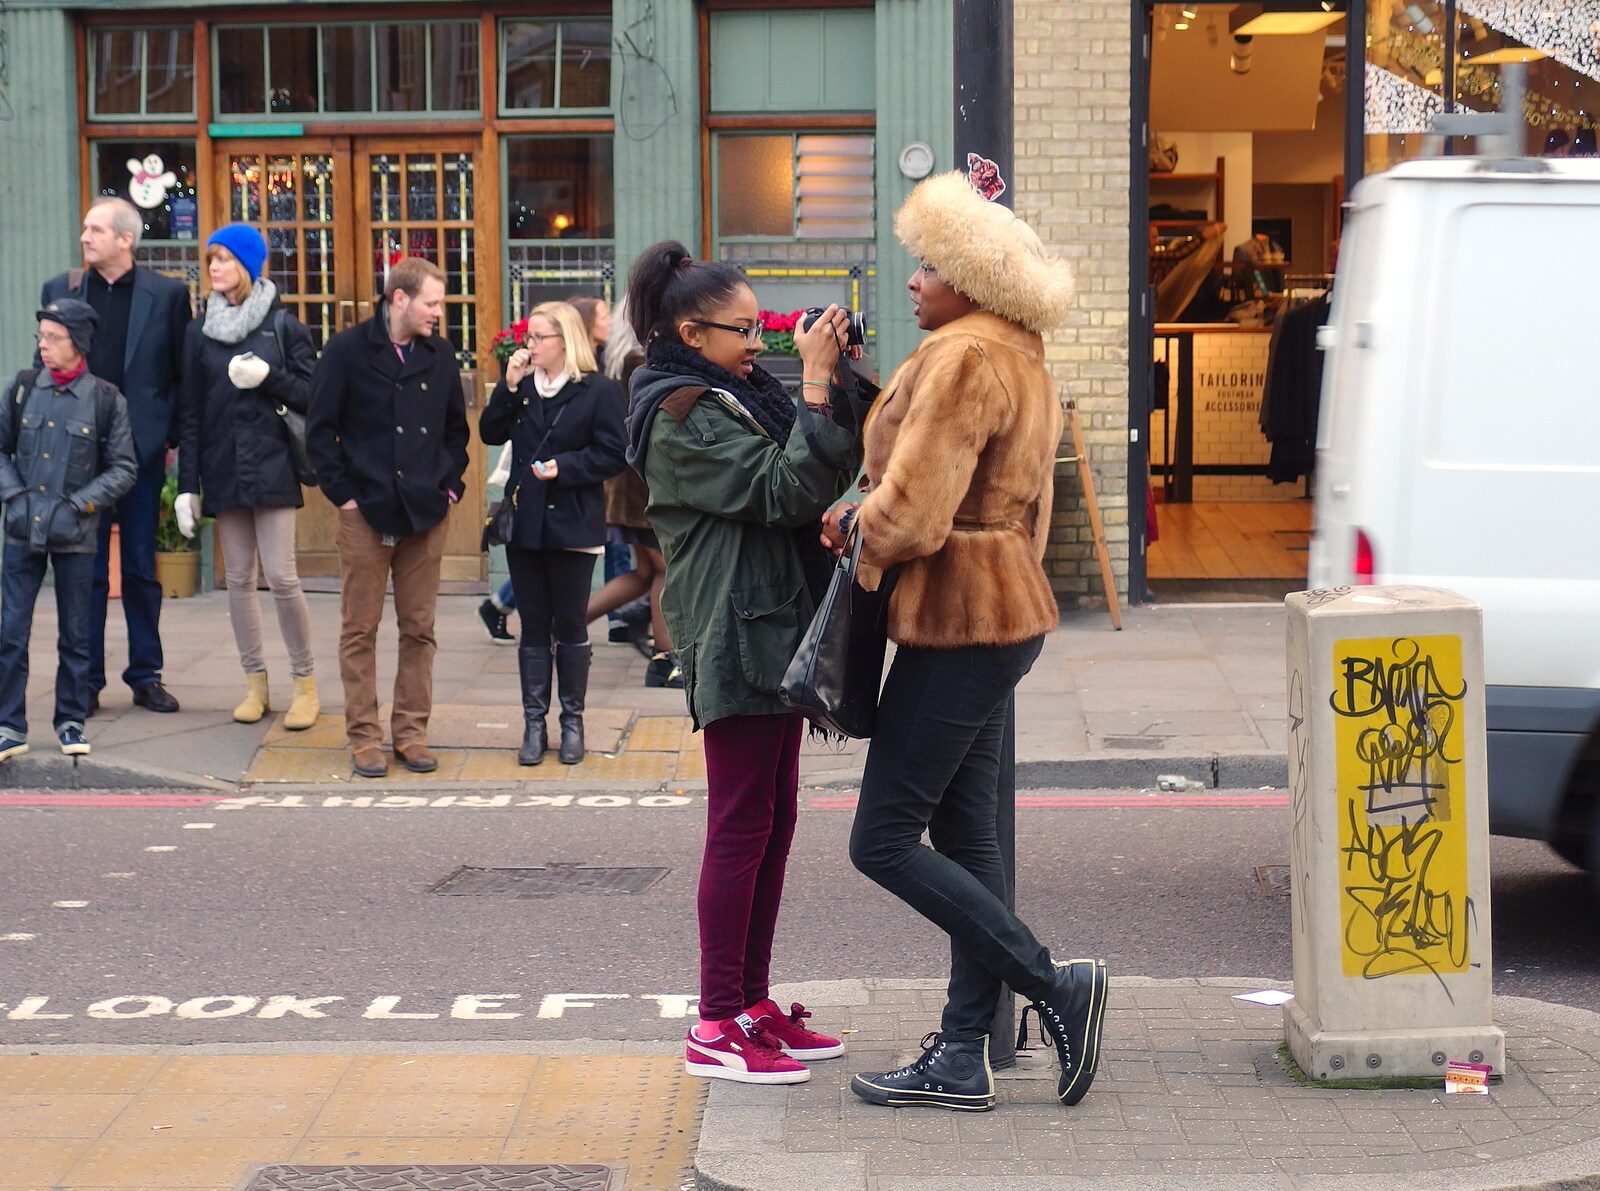 On Commercial Street, street photography occurs from Lunch in the East End, Spitalfields and Brick Lane, London - 1st December 2013